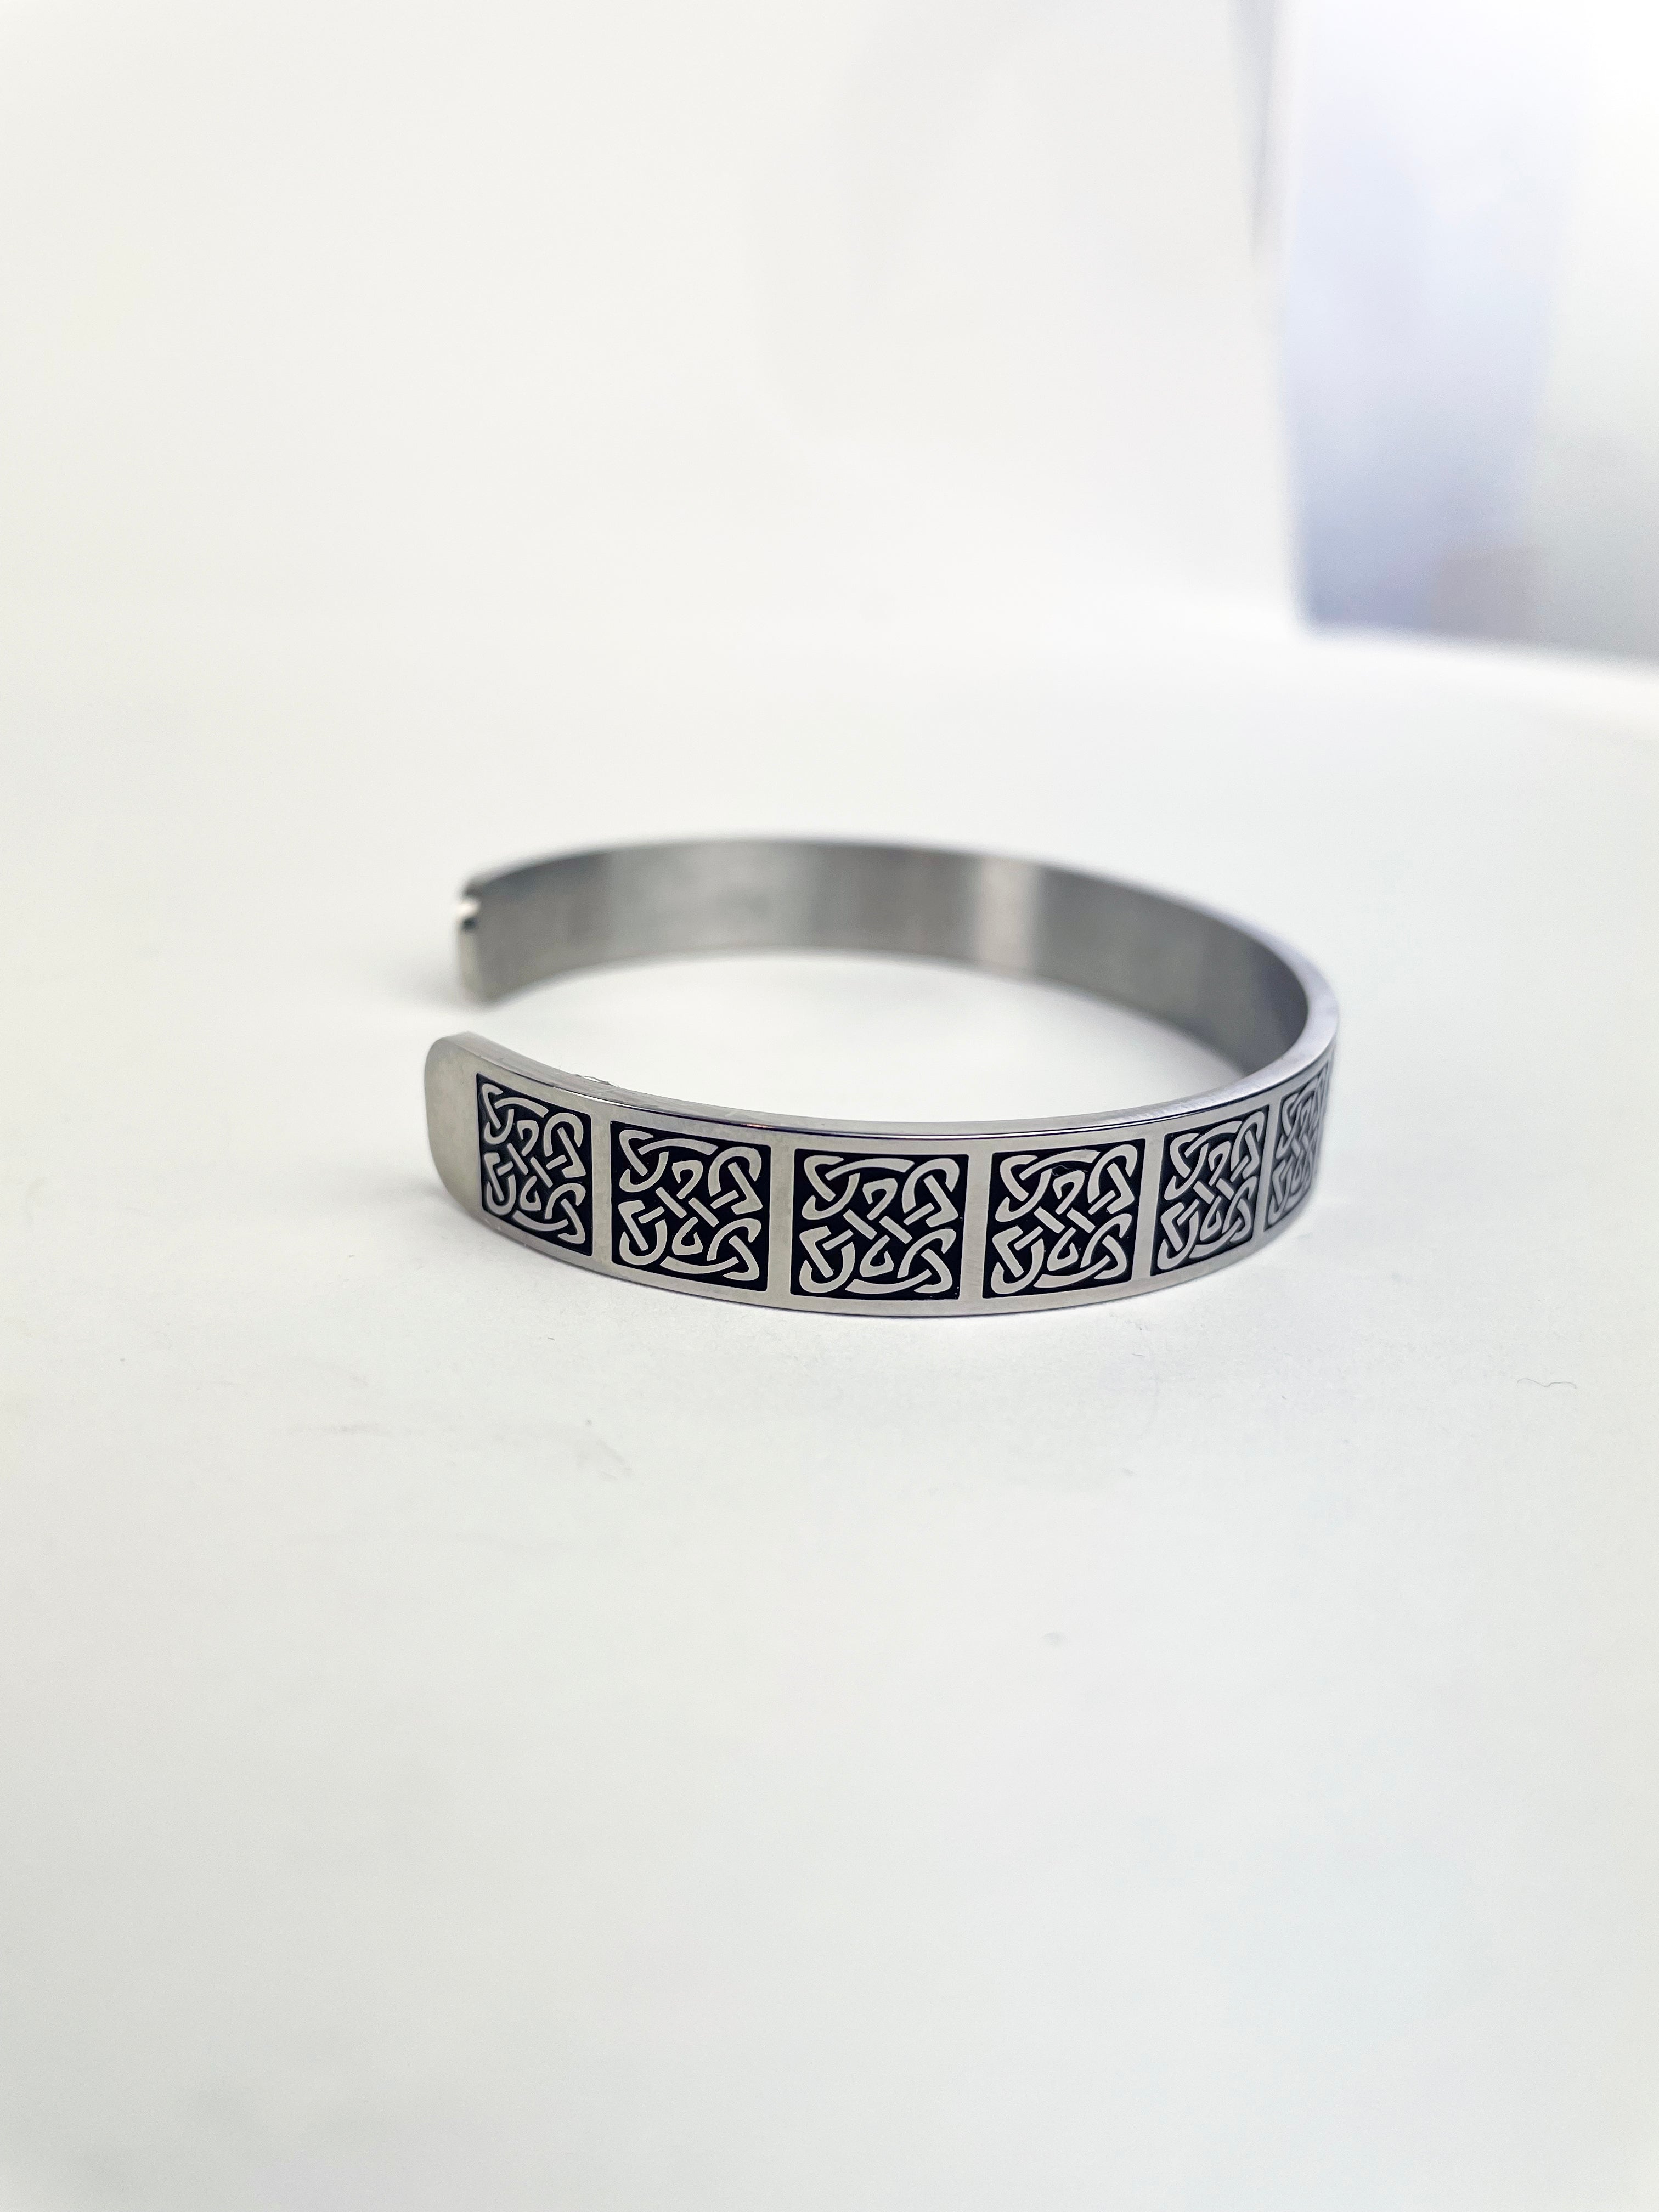 Men's Stainless Steel Cuff Bracelet with Square Celtic Knots